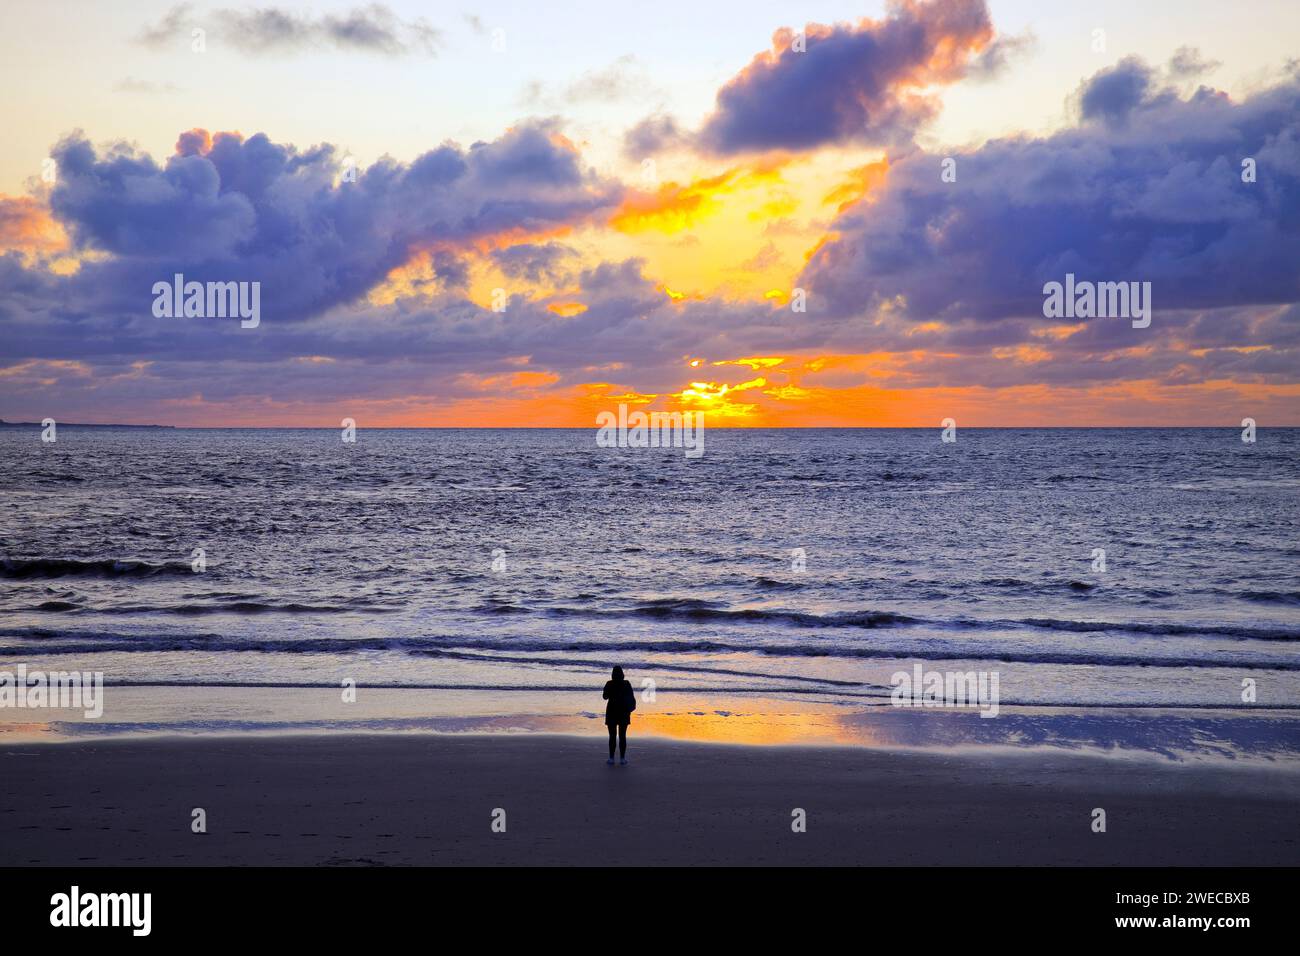 Wadden landscape with setting sun and a person by the sea, Germany, Lower Saxony, Norderney Stock Photo